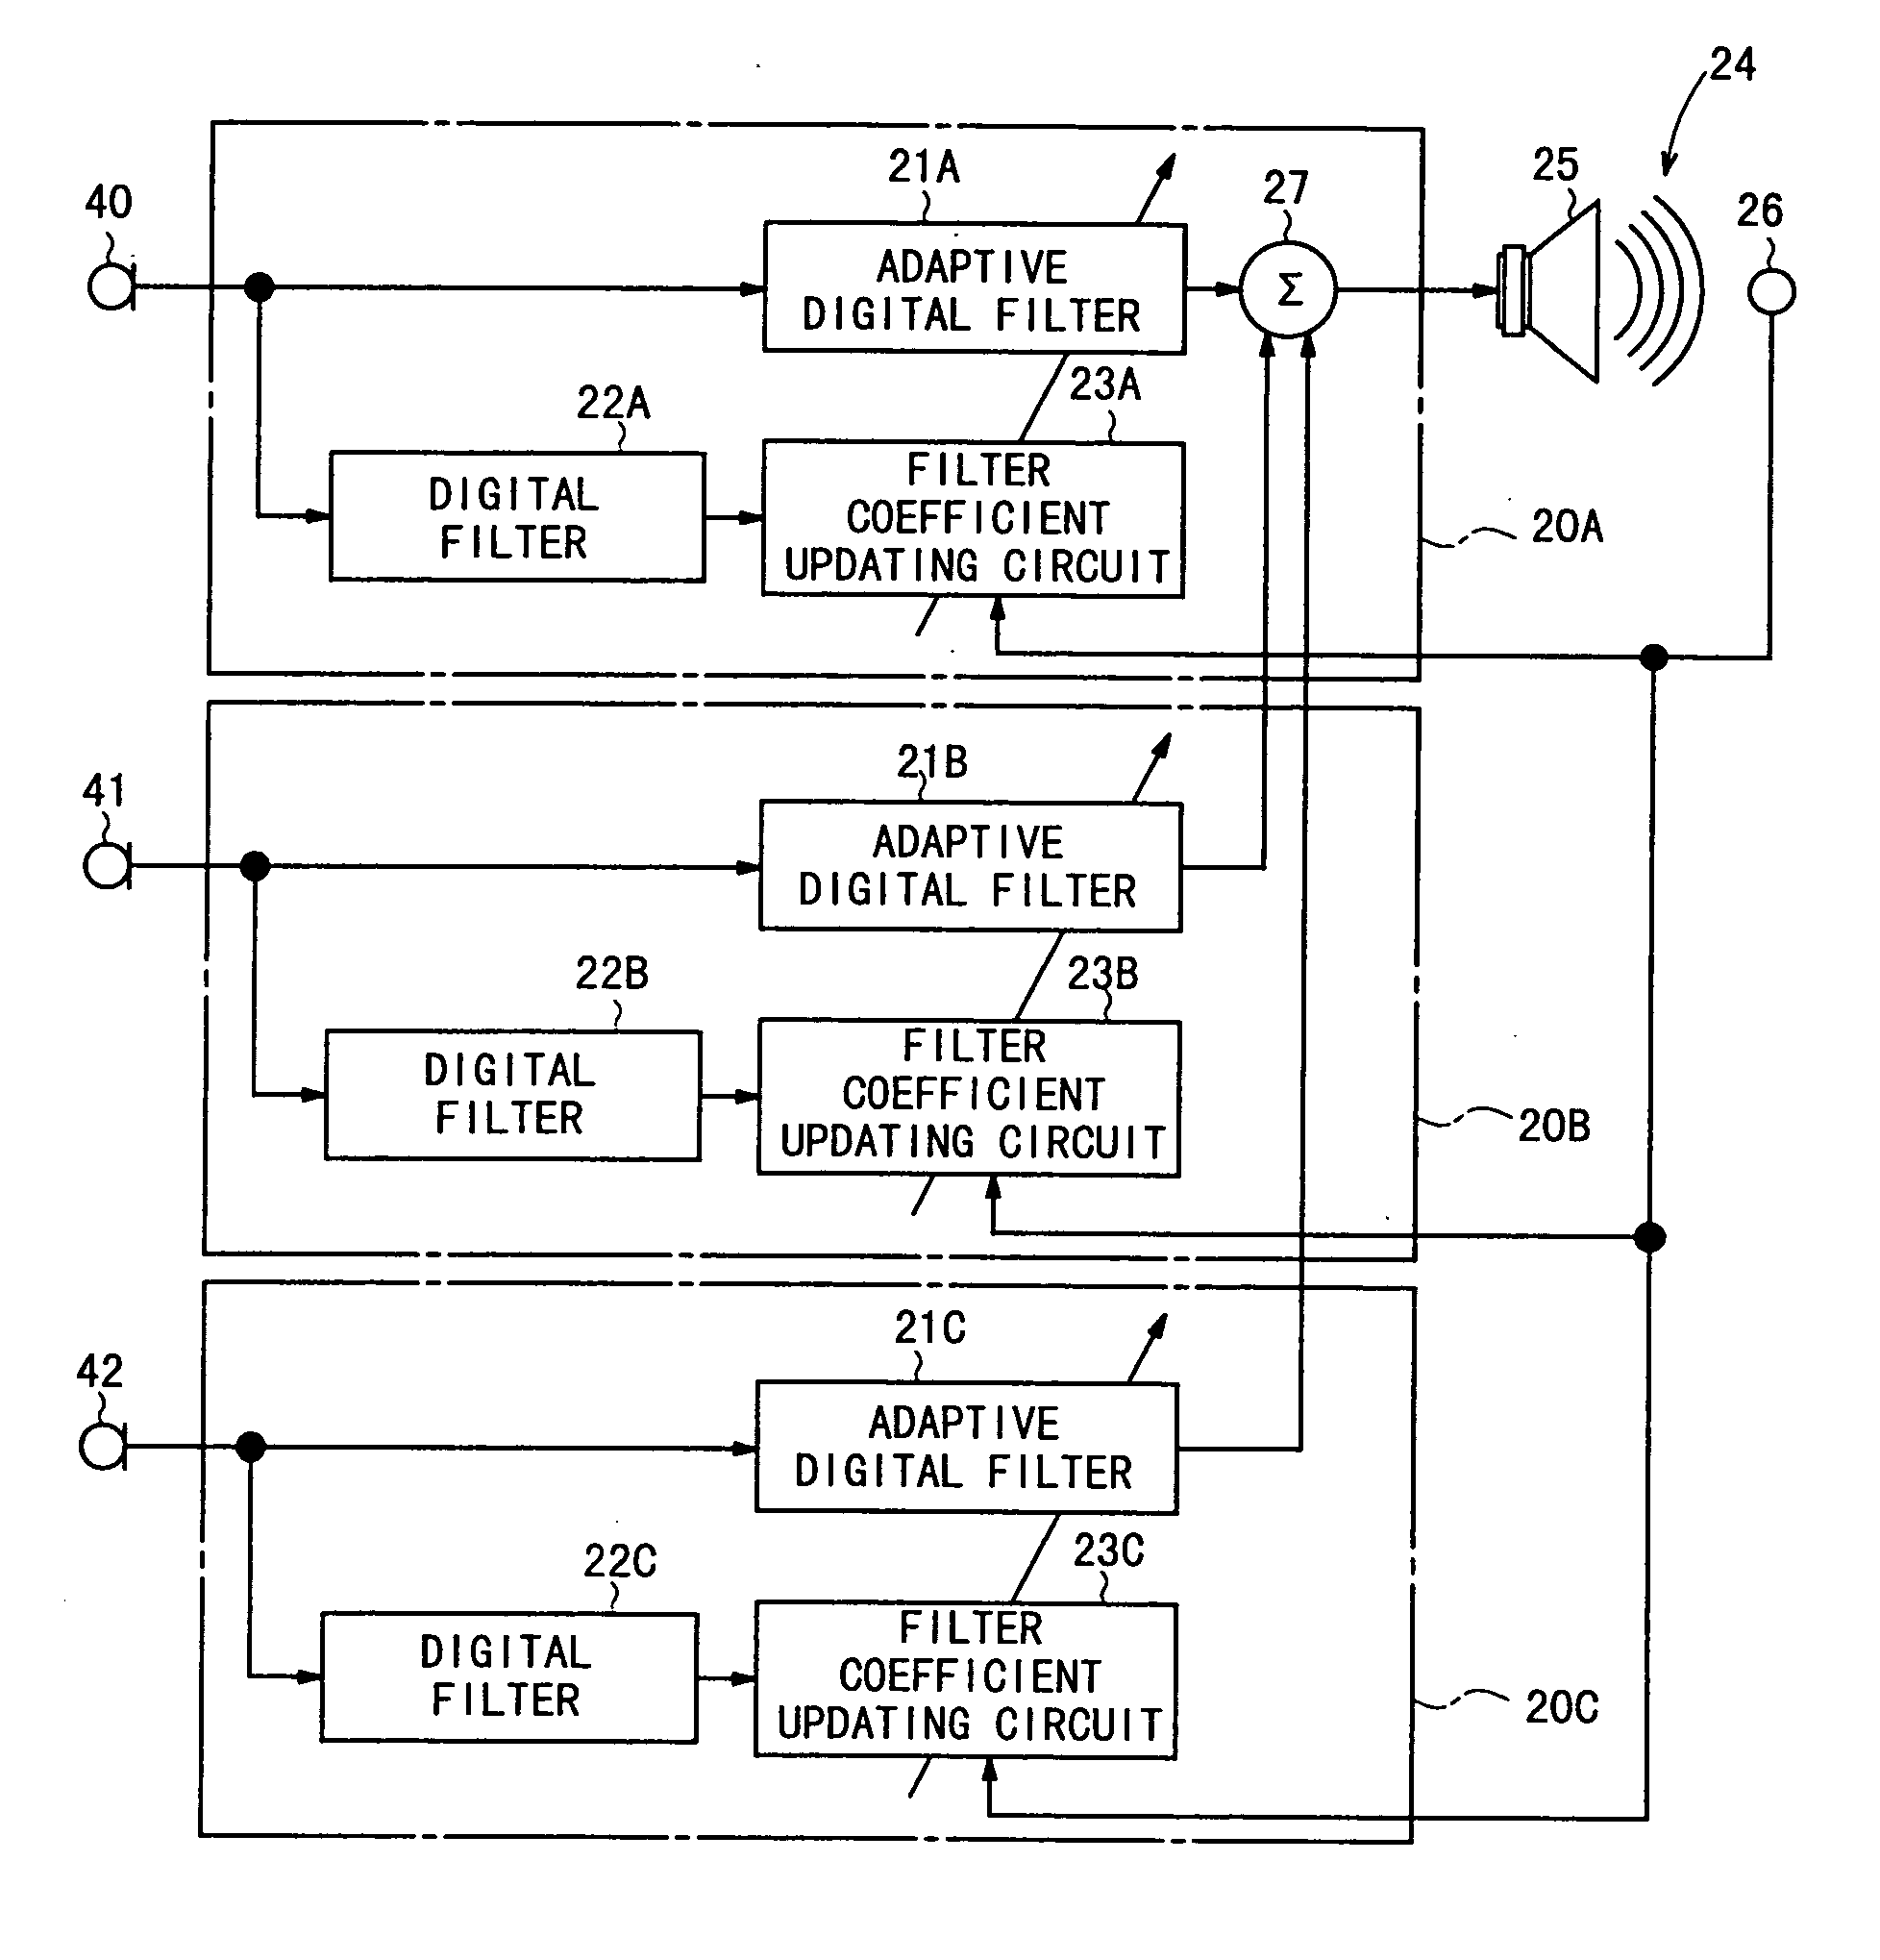 Active noise control system